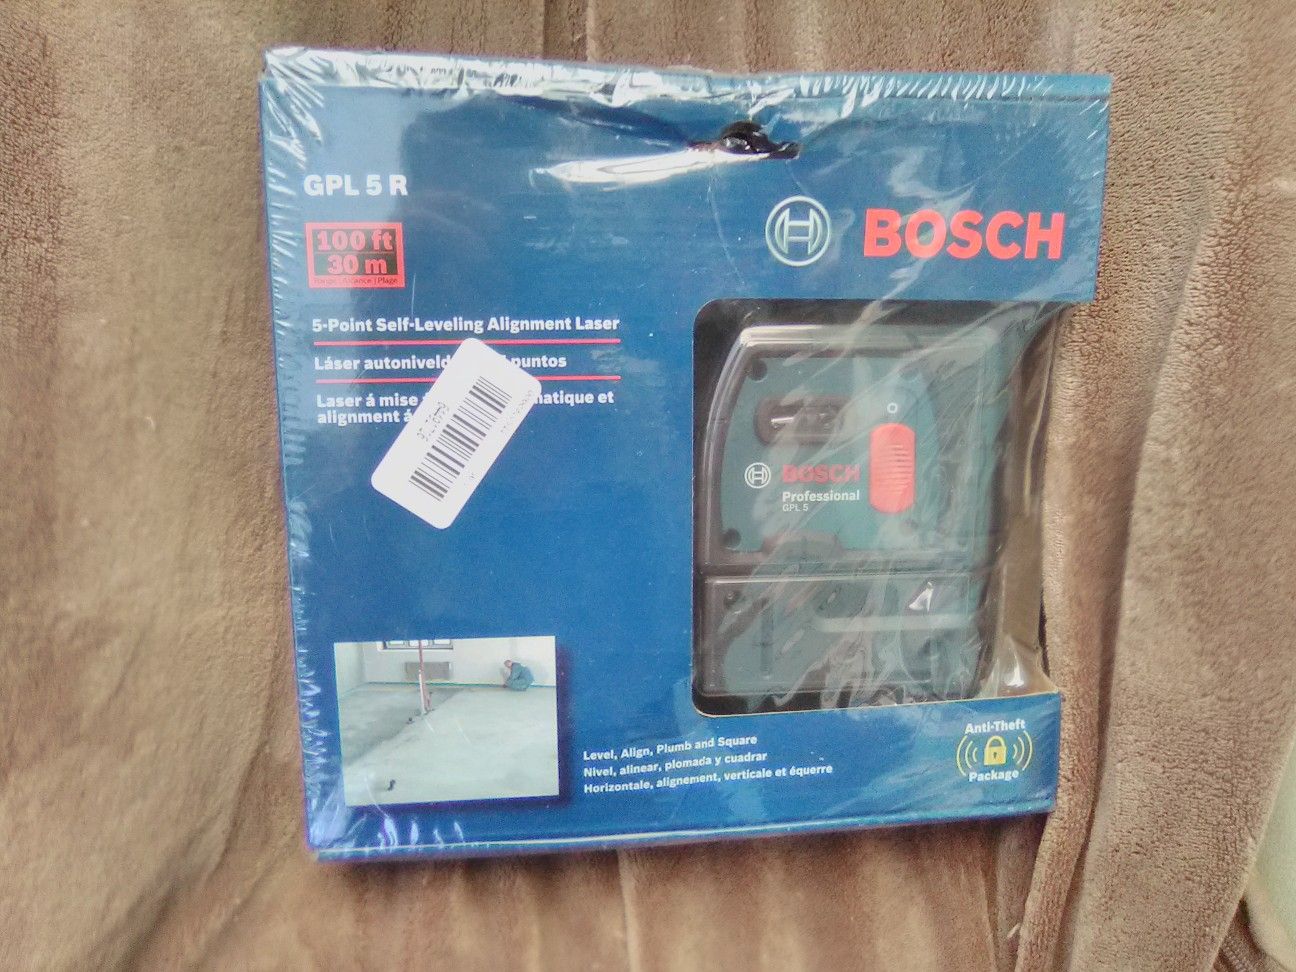 (MODEL GPL 5 R) BOSCH 100-ft SELF-LEVELING LINE GENERATOR BEAM LASER LEVEL WITH PLUMB POINTS